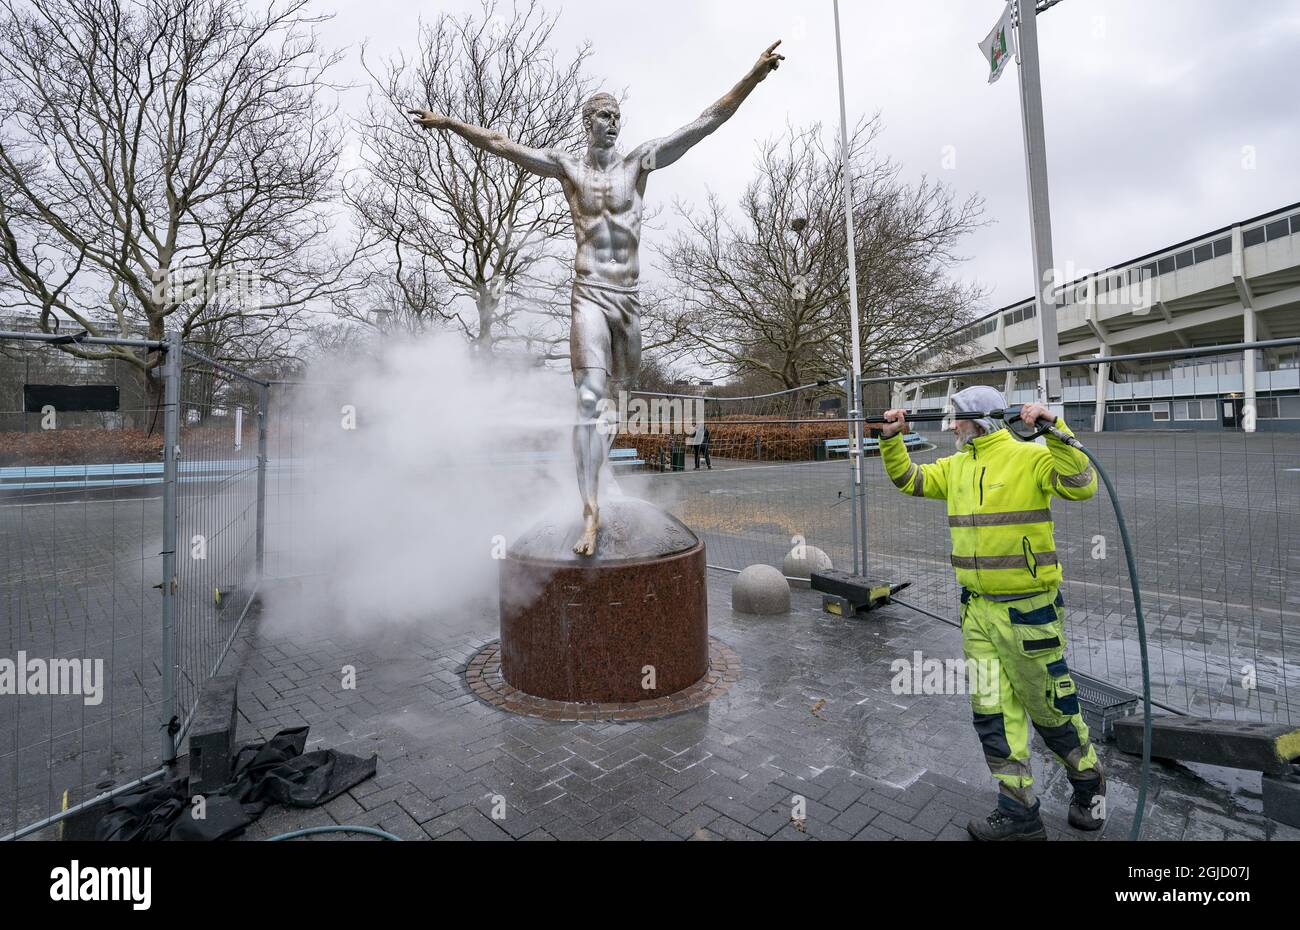 Zlatan Ibrahimovic’s statue has been vandalized yet again. This time the nose has been chopped off and it's been sprayed with white and silver paint in Malmo, Sweden, December 22, 2019. Ibrahimovic annonced in November that he had bought shares in the Swedish Stockholm based football team Hammarby, which has upset football fans in Zlatan's hometown Photo: Johan Nilsson / TT code 50090  Stock Photo